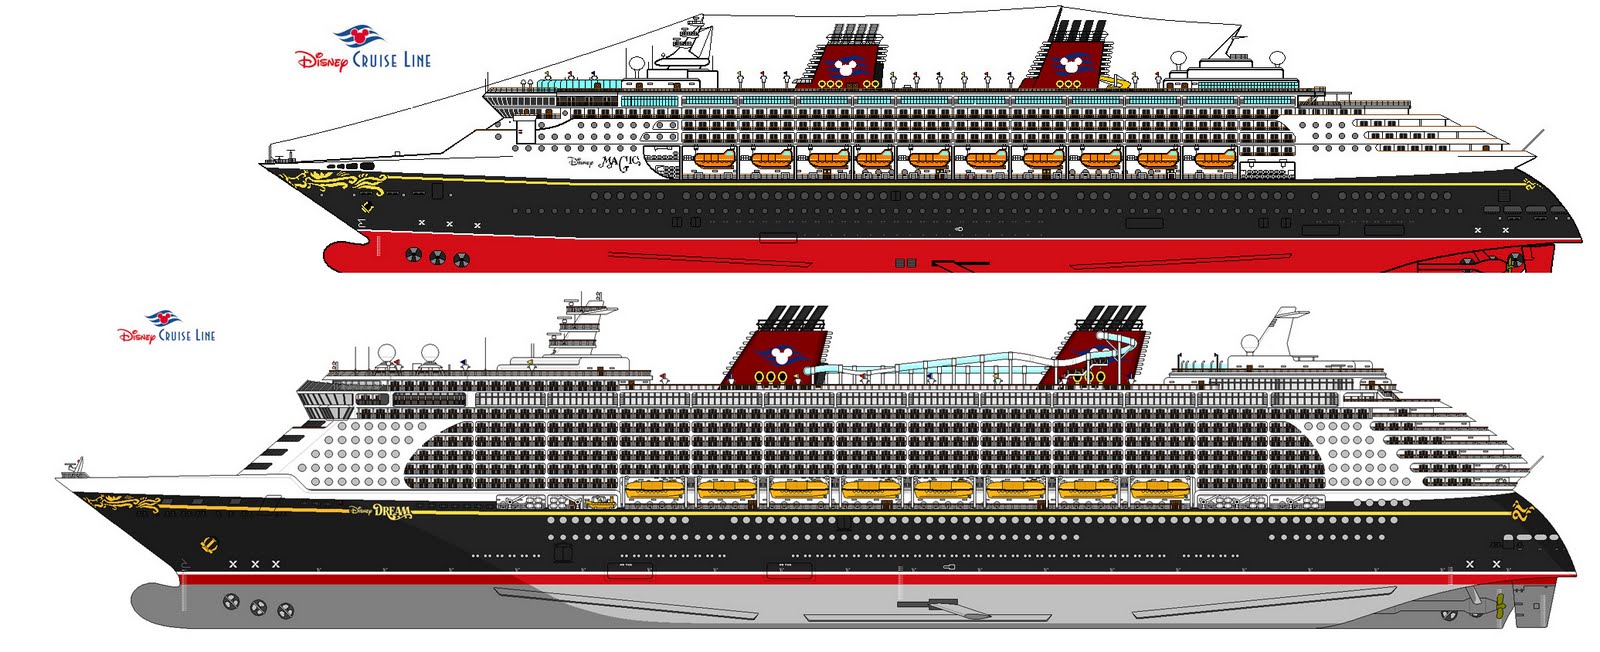 Mouse Guide: Identifying Disney Cruise Ships